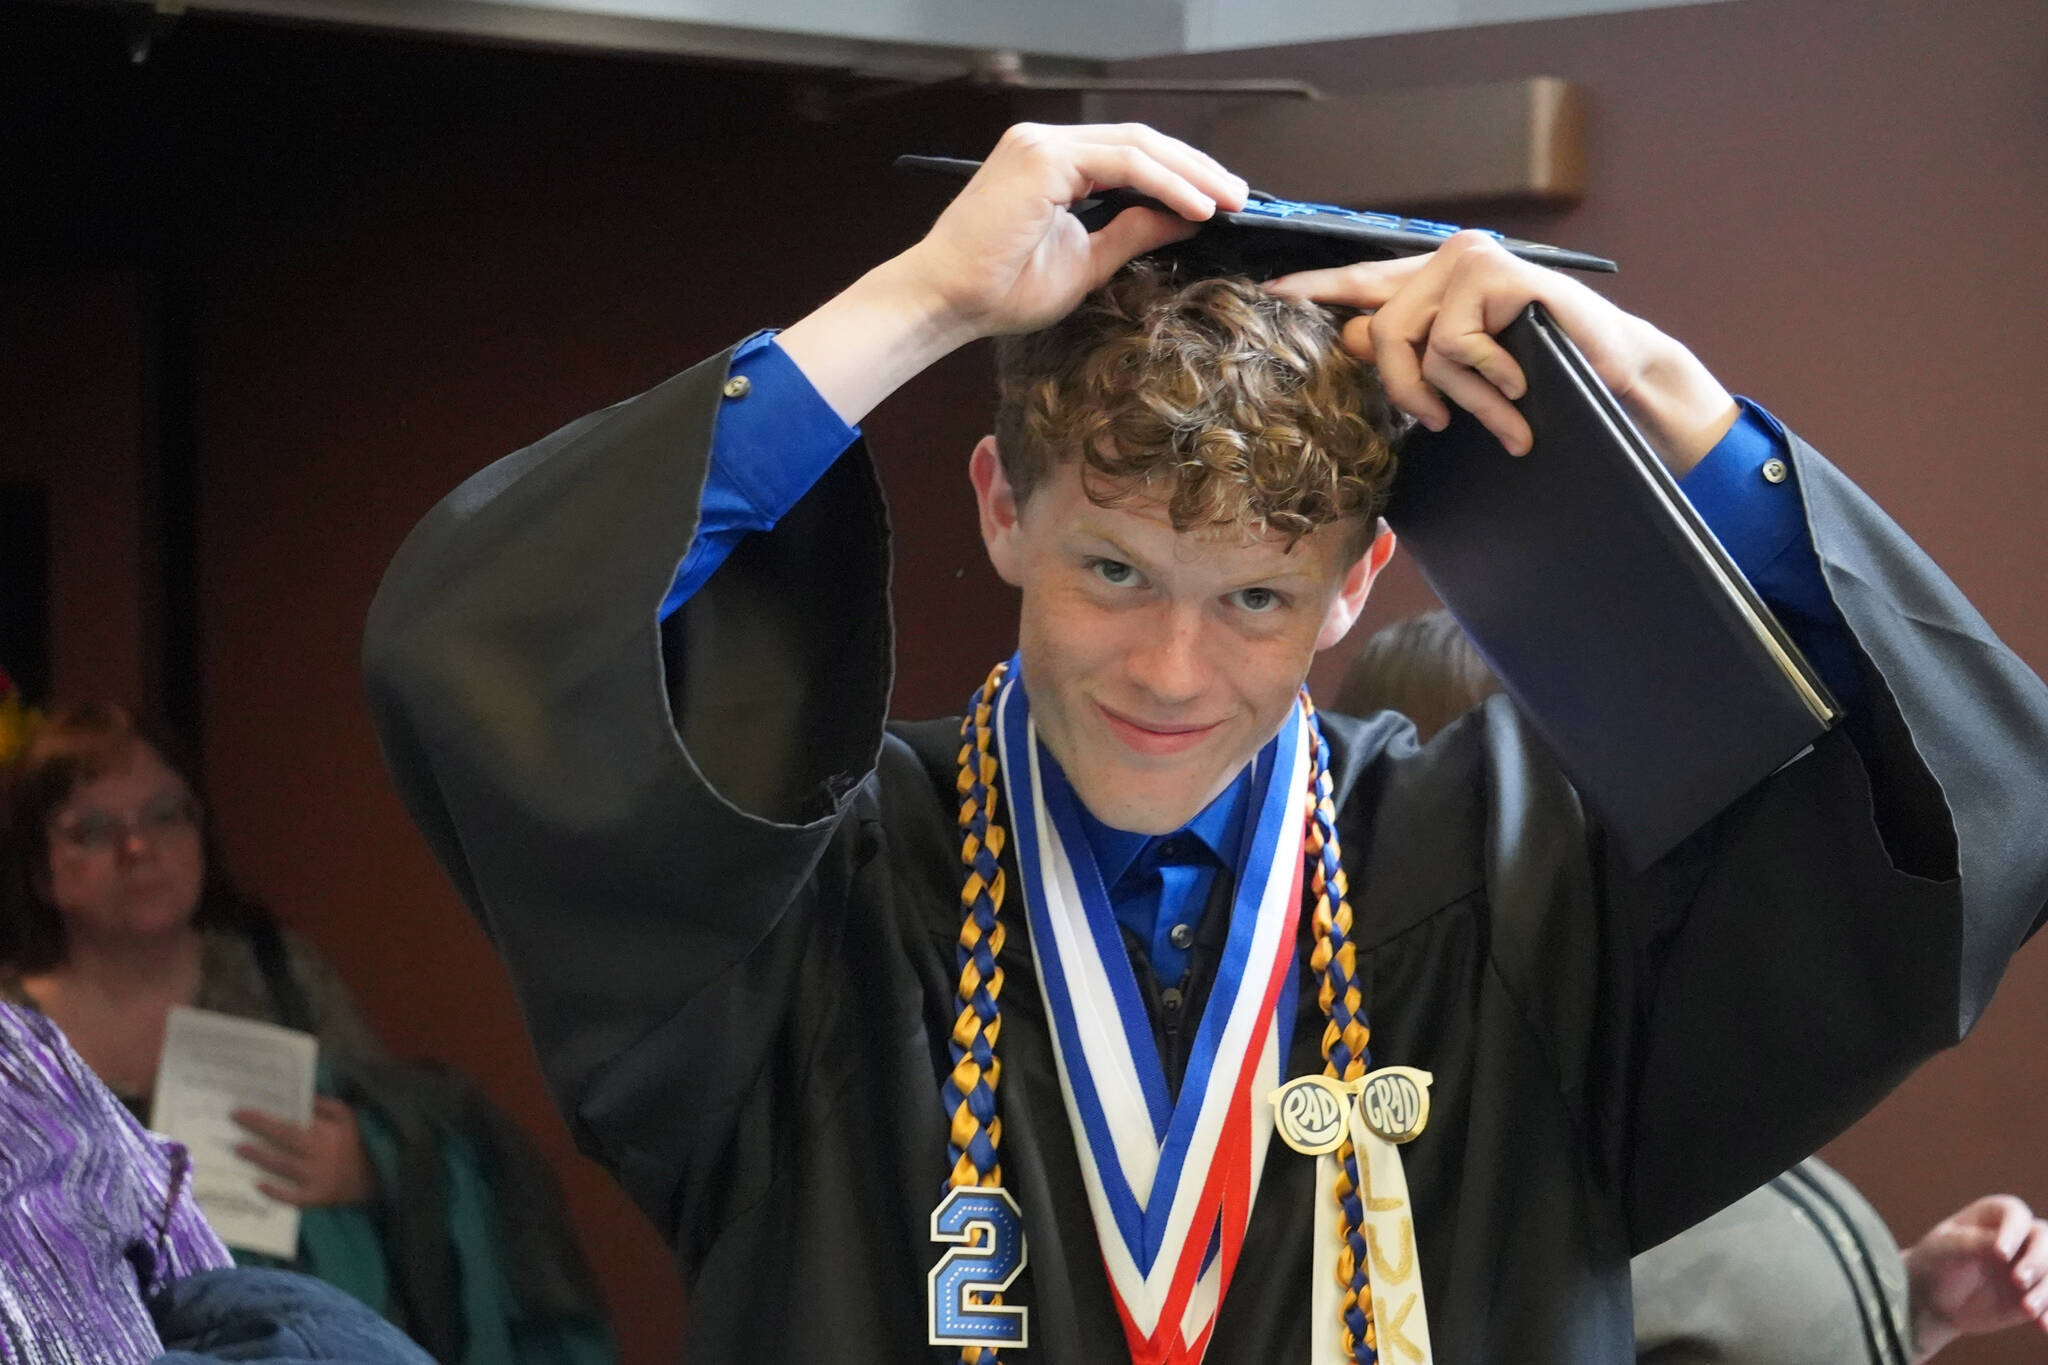 Graduates of Connections Homeschool exit the auditorium, diplomas in hand, after their graduation ceremony on Thursday, May 18, 2023, at Soldotna High School in Soldotna, Alaska. (Jake Dye/Peninsula Clarion)